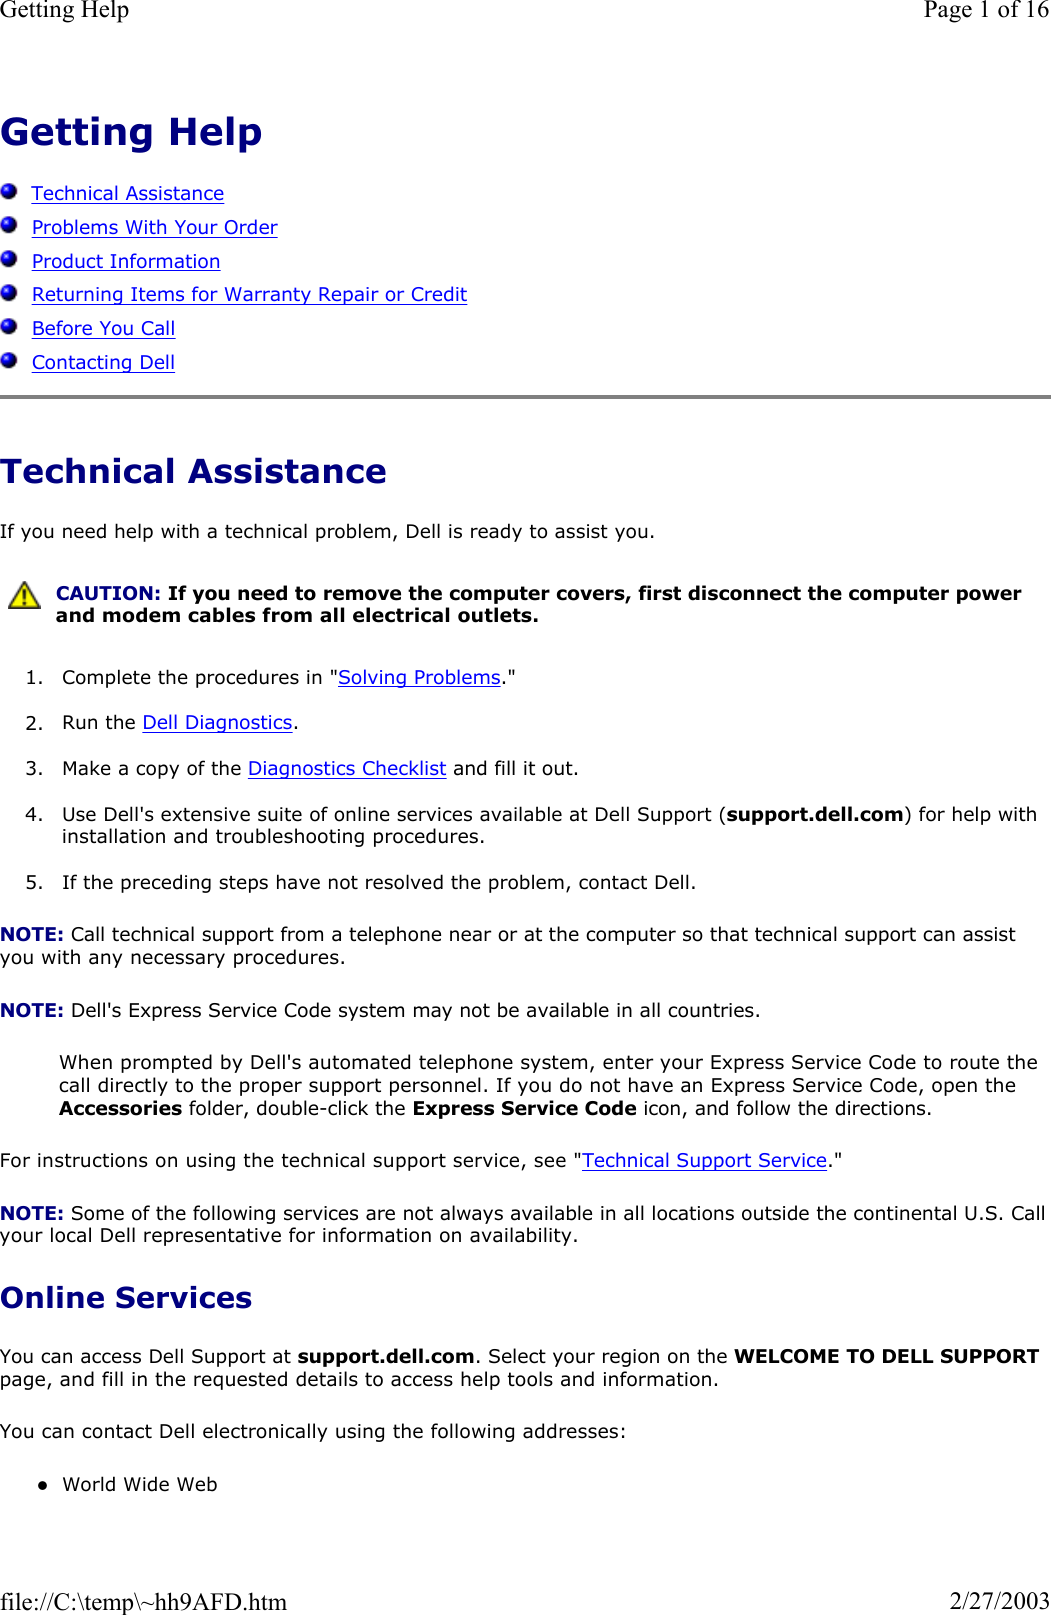 Getting HelpTechnical AssistanceProblems With Your OrderProduct InformationReturning Items for Warranty Repair or CreditBefore You CallContacting DellTechnical Assistance If you need help with a technical problem, Dell is ready to assist you. 1. Complete the procedures in &quot;Solving Problems.&quot;2. Run the Dell Diagnostics.3. Make a copy of the Diagnostics Checklist and fill it out. 4. Use Dell&apos;s extensive suite of online services available at Dell Support (support.dell.com) for help with installation and troubleshooting procedures. 5. If the preceding steps have not resolved the problem, contact Dell. NOTE: Call technical support from a telephone near or at the computer so that technical support can assist you with any necessary procedures. NOTE: Dell&apos;s Express Service Code system may not be available in all countries. When prompted by Dell&apos;s automated telephone system, enter your Express Service Code to route the call directly to the proper support personnel. If you do not have an Express Service Code, open the Accessories folder, double-click the Express Service Code icon, and follow the directions. For instructions on using the technical support service, see &quot;Technical Support Service.&quot;NOTE: Some of the following services are not always available in all locations outside the continental U.S. Callyour local Dell representative for information on availability. Online Services You can access Dell Support at support.dell.com. Select your region on the WELCOME TO DELL SUPPORTpage, and fill in the requested details to access help tools and information.  You can contact Dell electronically using the following addresses: zWorld Wide Web CAUTION: If you need to remove the computer covers, first disconnect the computer power and modem cables from all electrical outlets.Page 1 of 16Getting Help2/27/2003file://C:\temp\~hh9AFD.htm